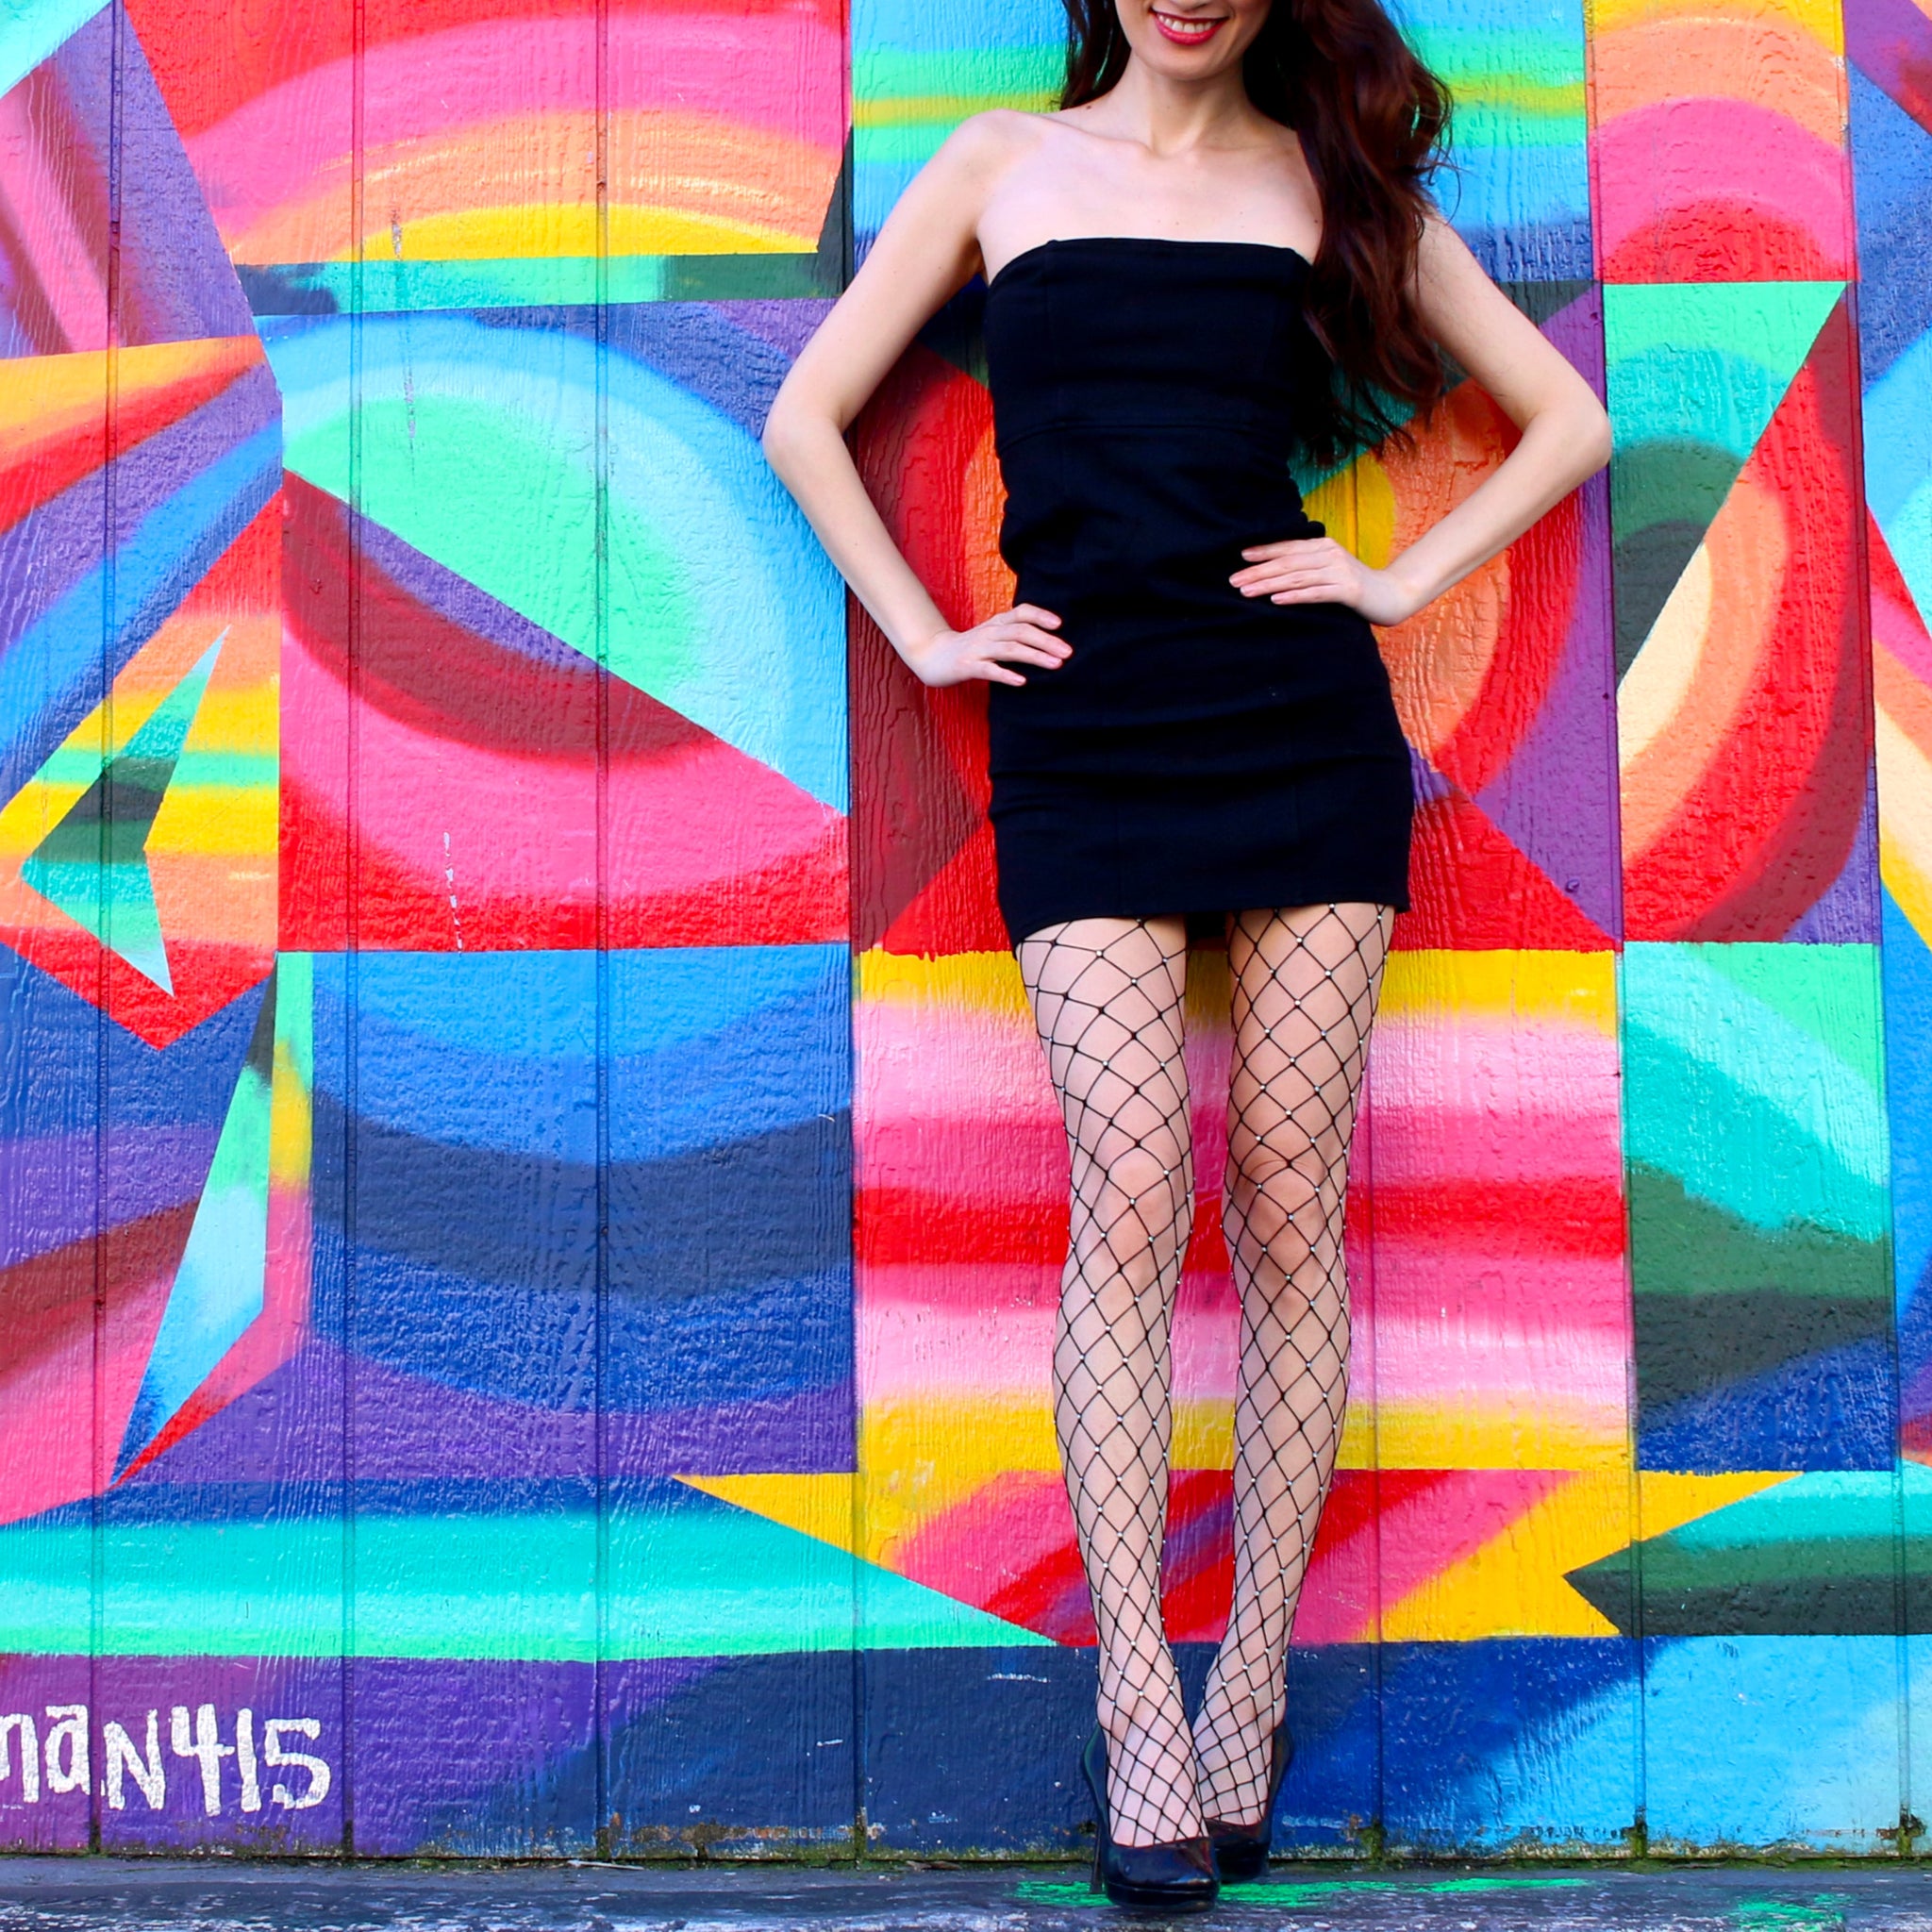 DIY Sparkle and Glitter Thigh High/Tights Tutorial – A Sparkly